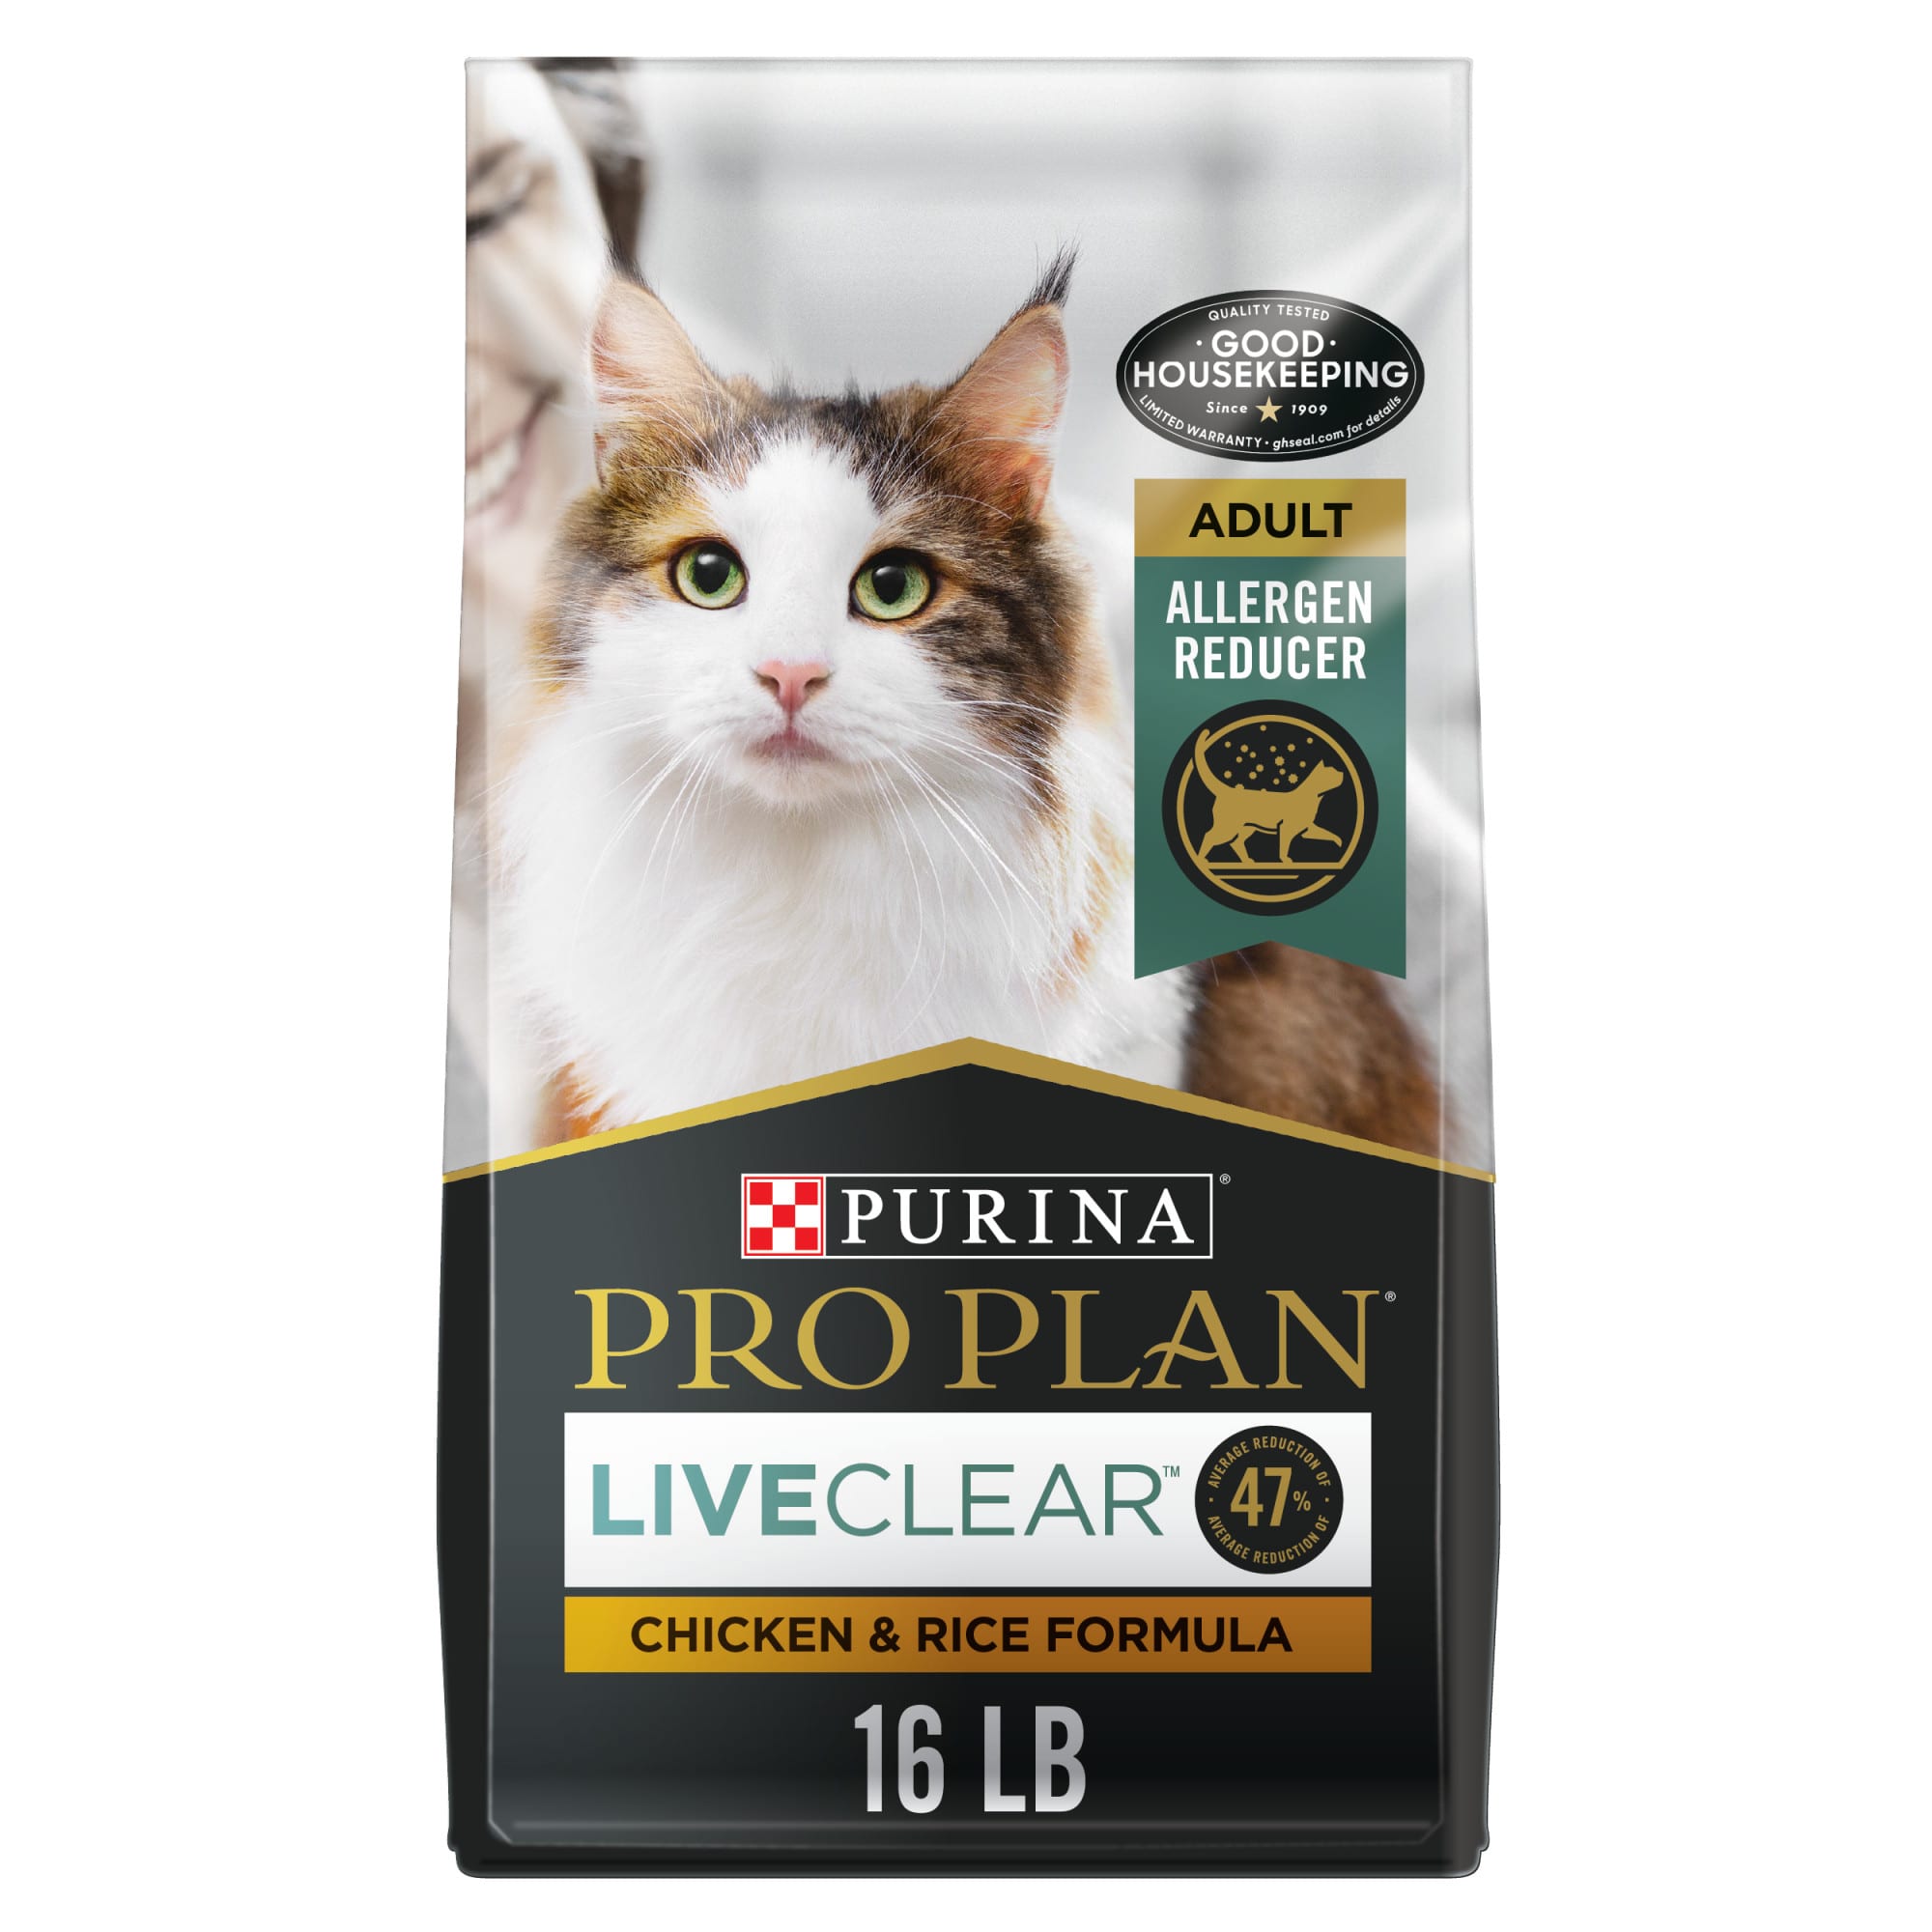 Purina Plan With Probiotics, High Protein LiveClear Chicken & Rice Formula Dry Food, lbs. | Petco